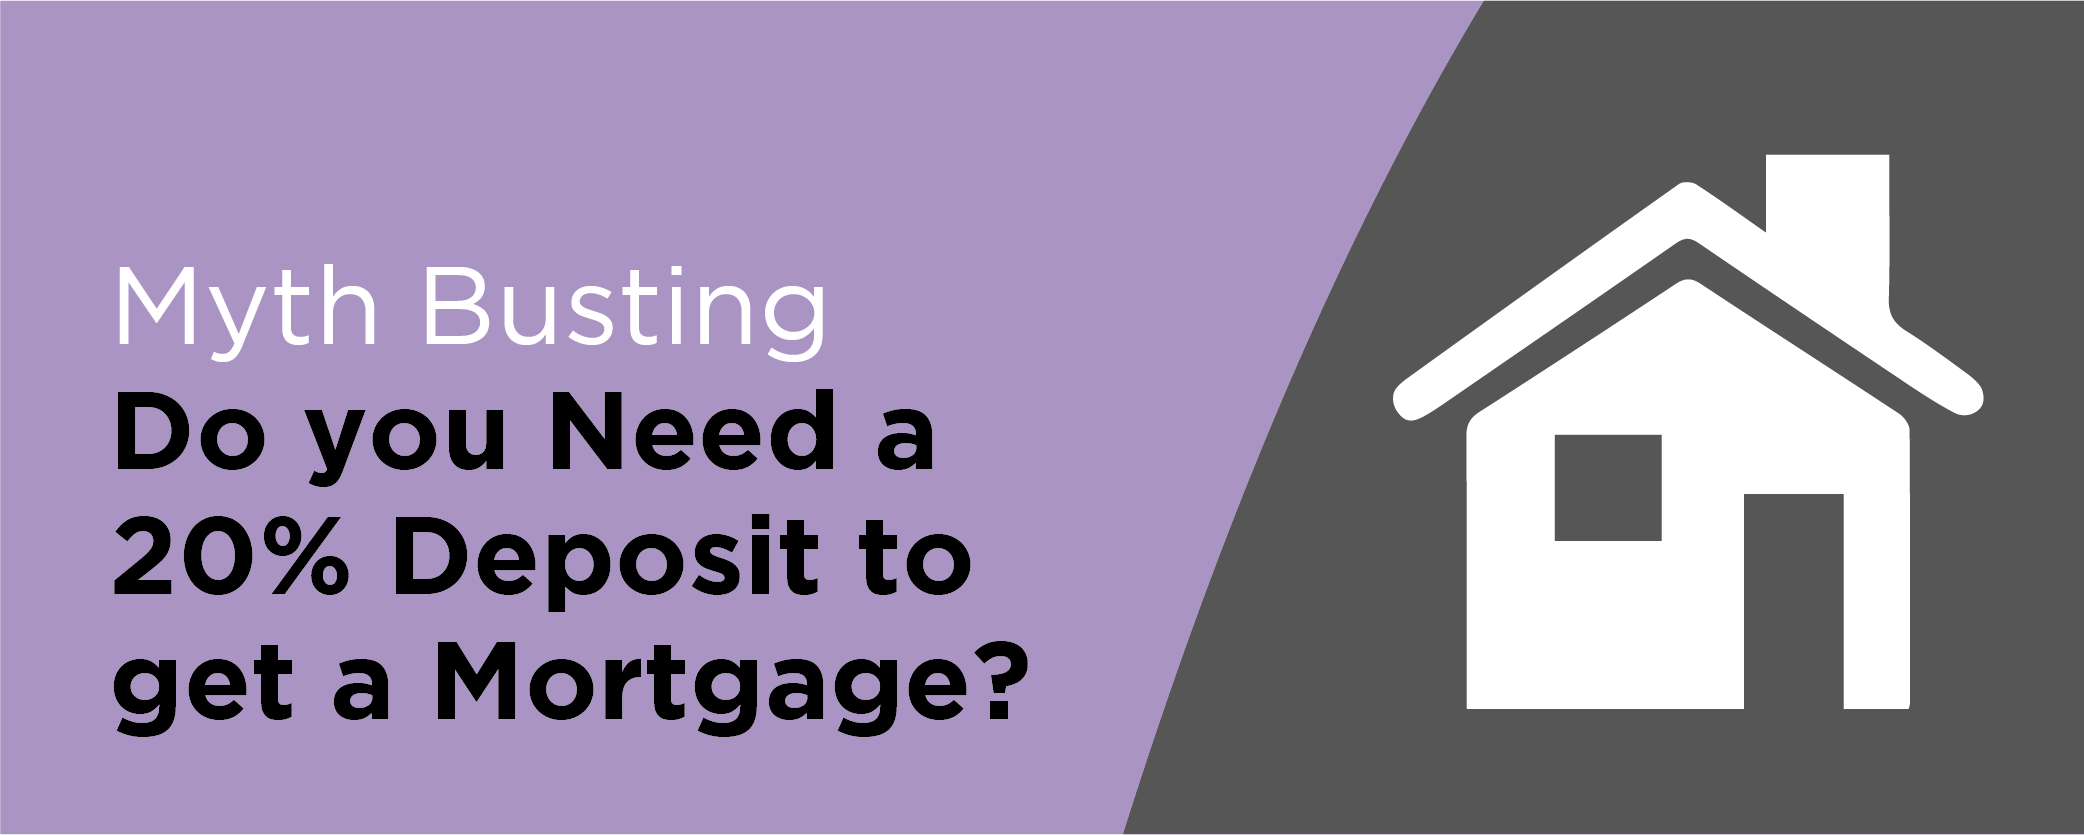 Myth Busting: Do you need a 20% deposit to get a mortgage?